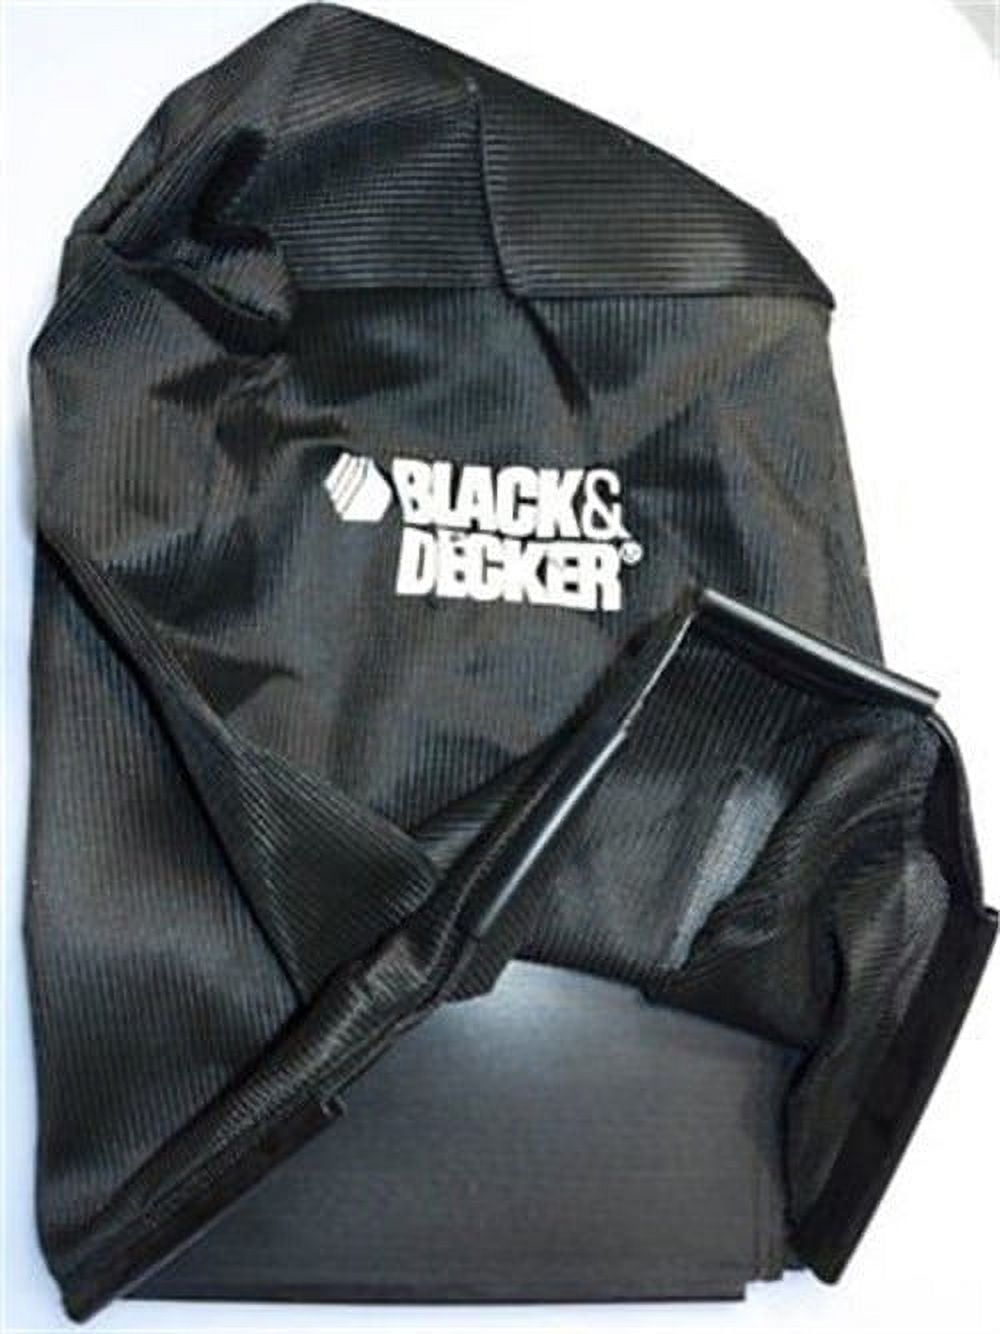 Black And Decker Collection Bag 492873-00